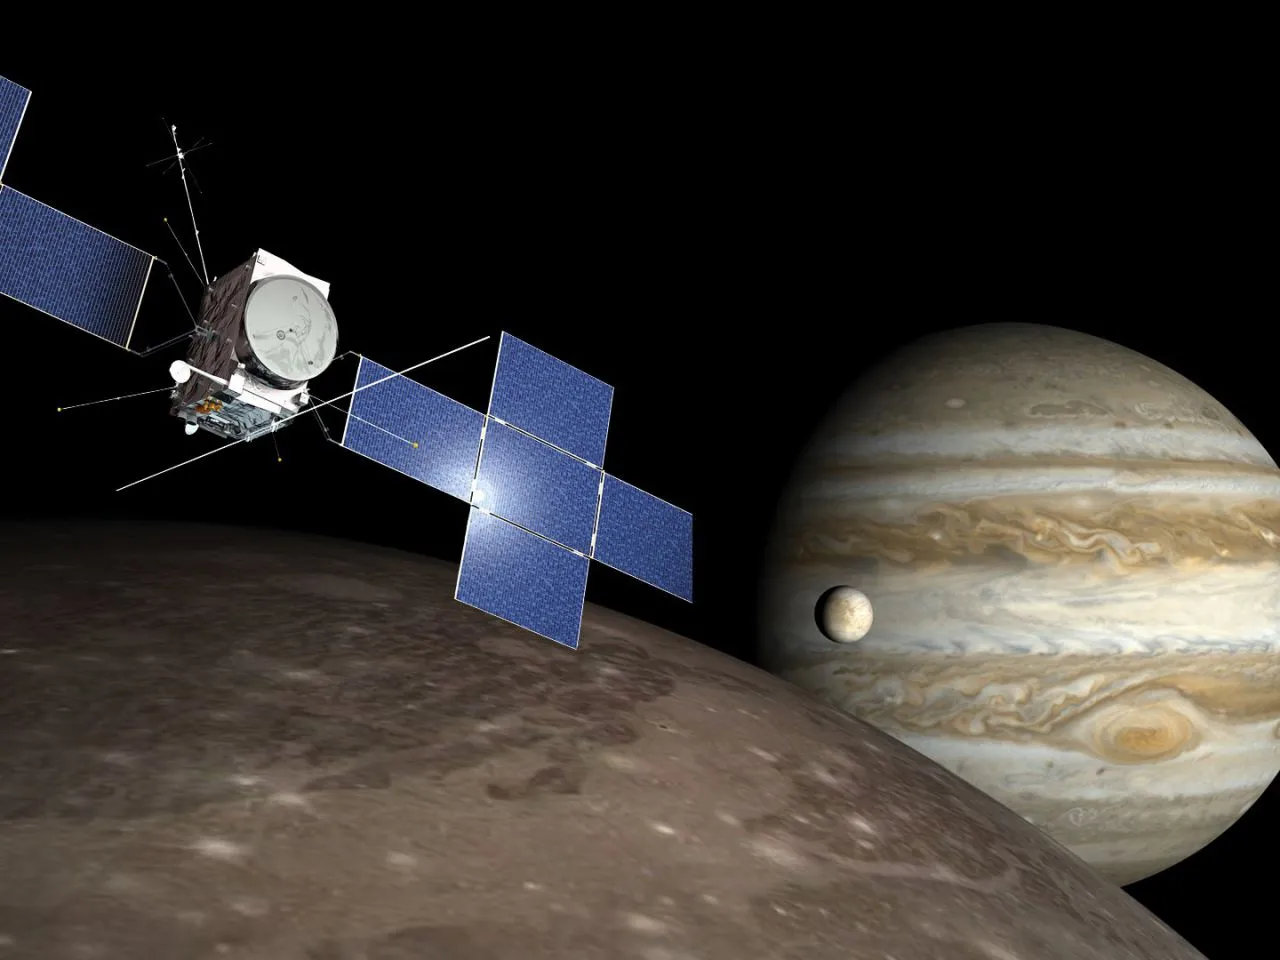 The fully European space probe Jupiter Icy Moons Explorer (JUICE) has passed its tests and is ready for launch on April 13th.